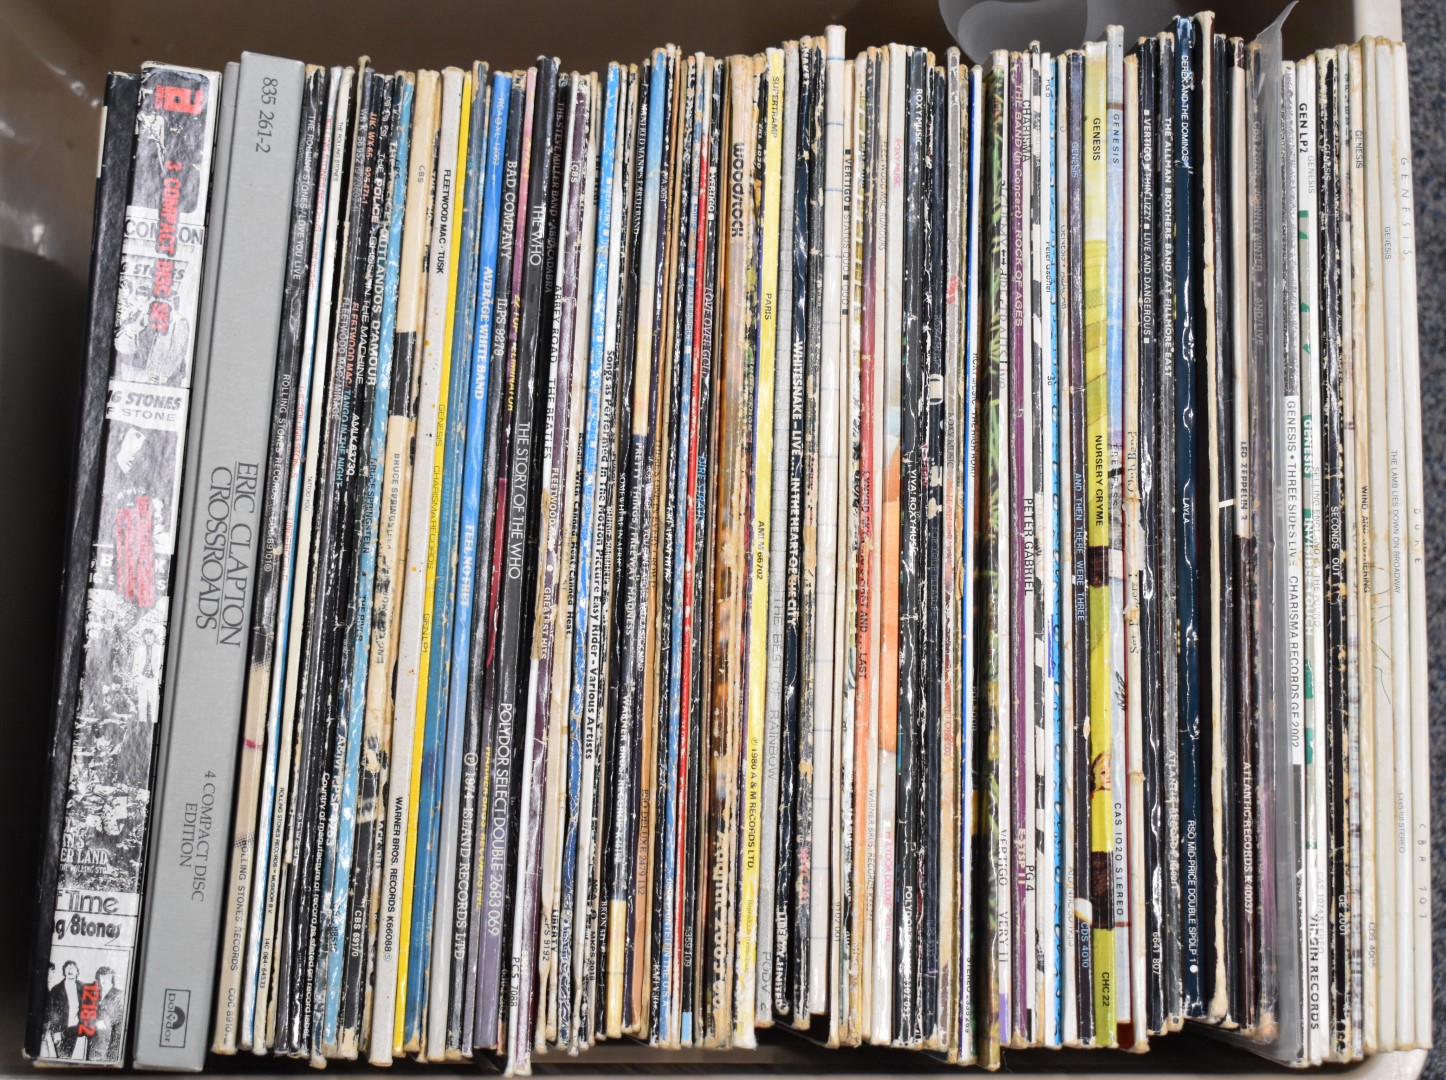 Approximately 85 albums including Fleetwood Mac, The Beatles, Pink Floyd, Genesis, Roxy Music, - Image 4 of 4